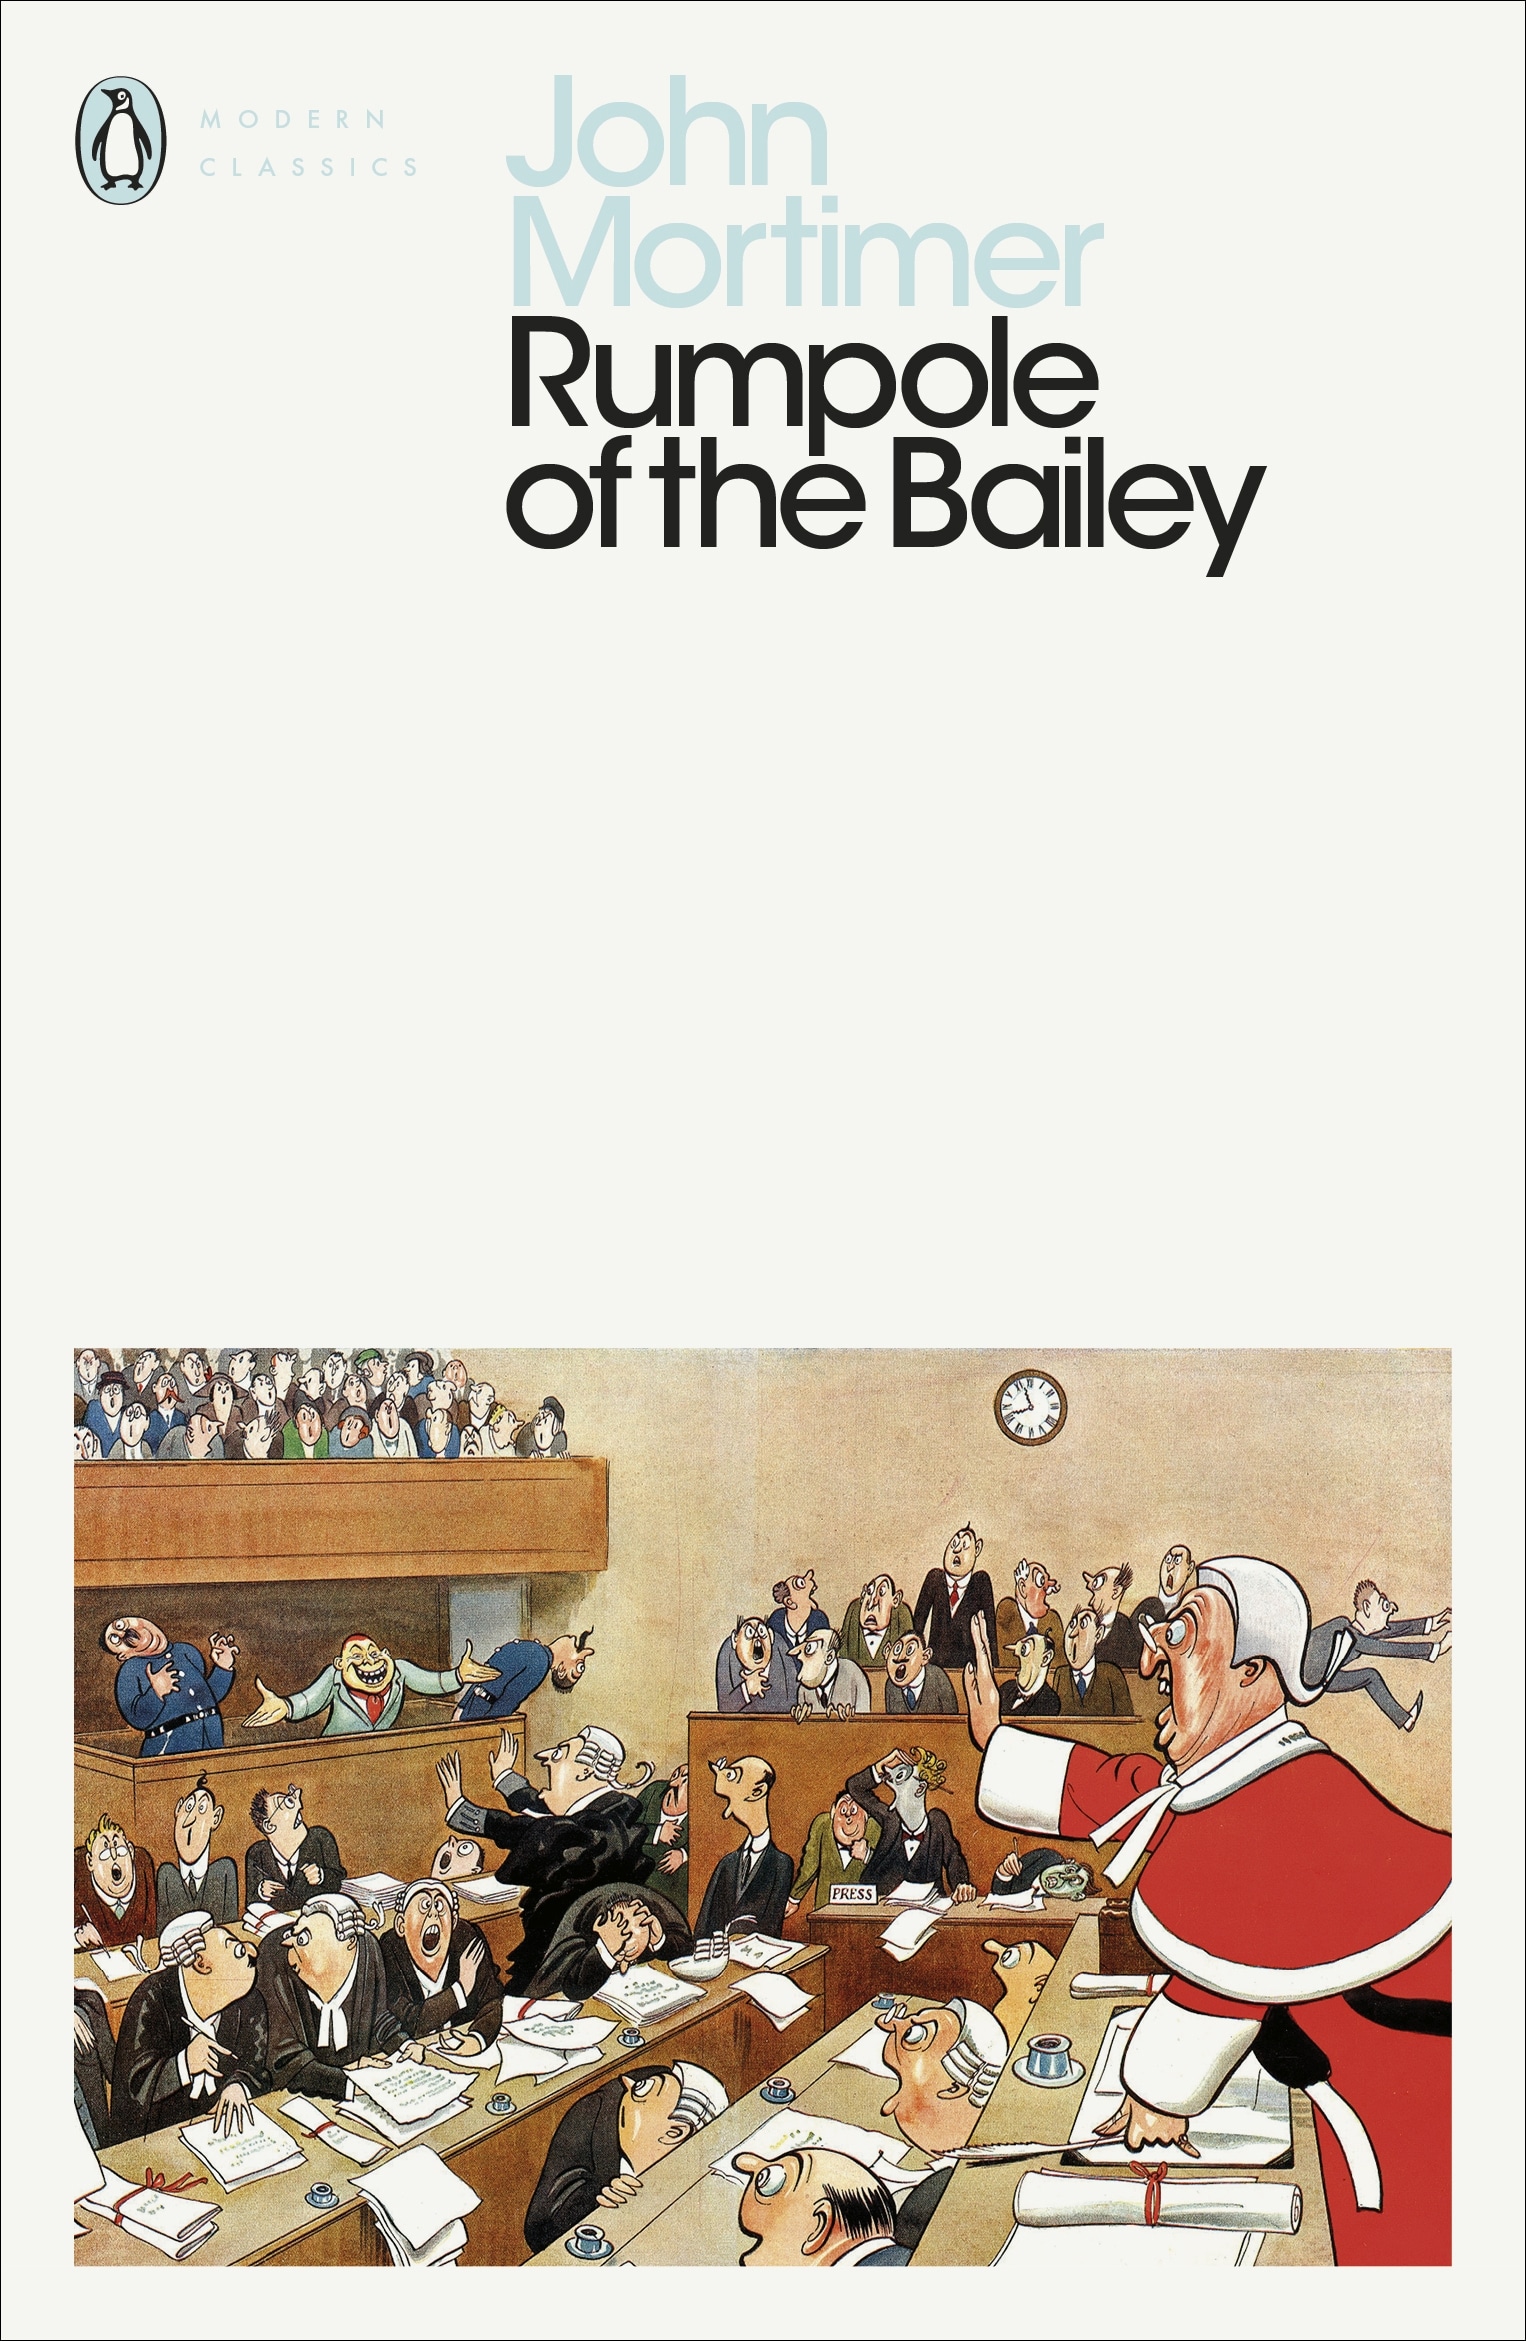 Book “Rumpole of the Bailey” by John Mortimer — April 4, 2019